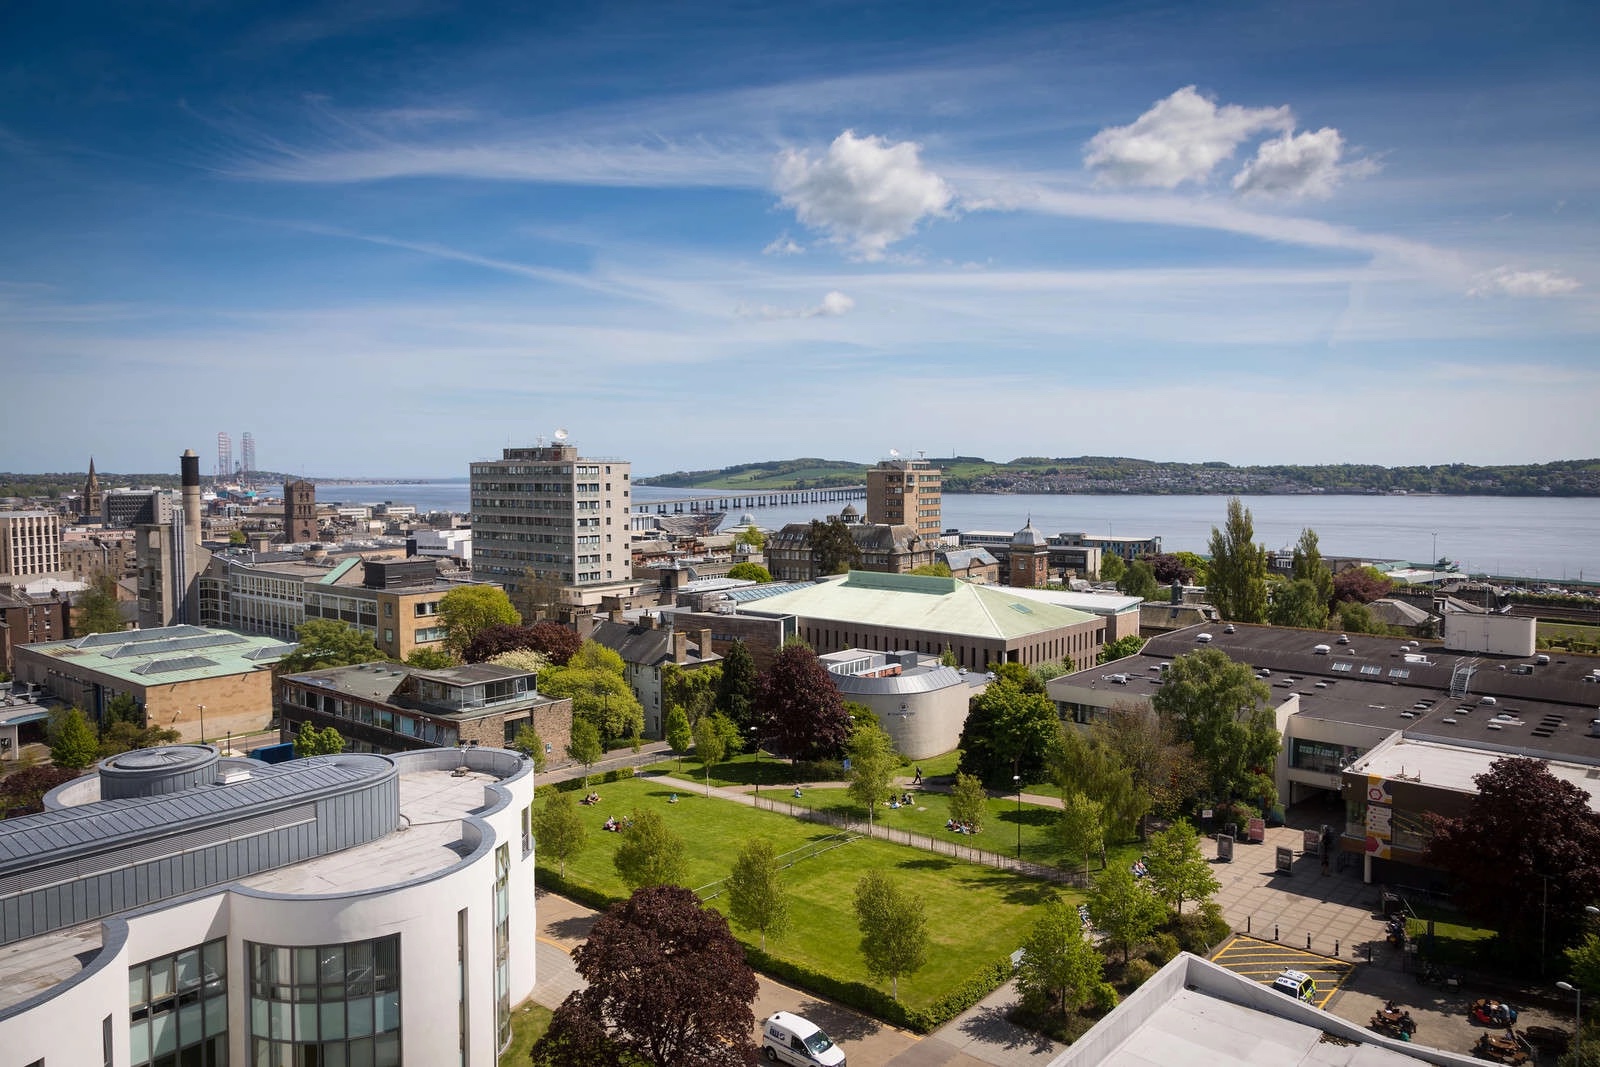 University city campus looking out at the River Tay